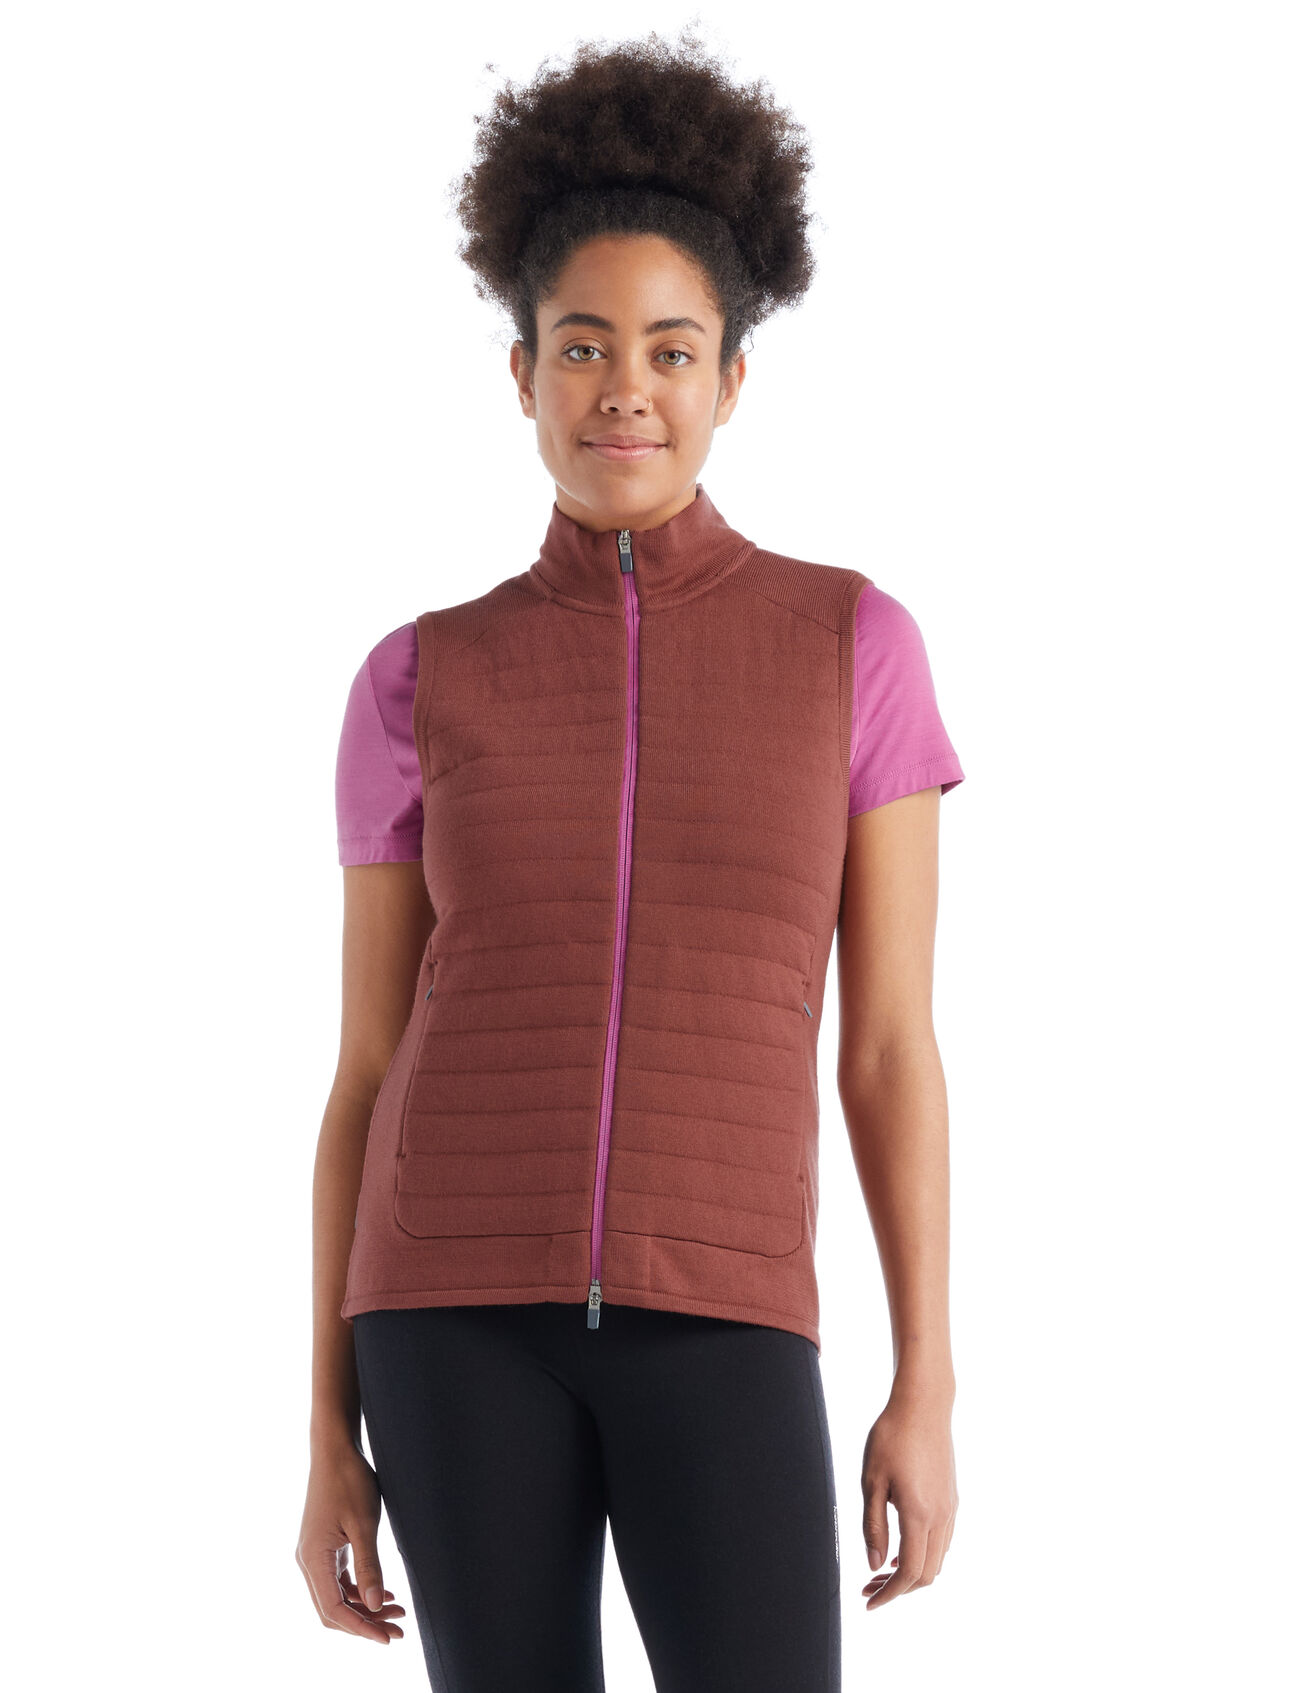 Womens ZoneKnit™ Merino Insulated Vest A body-mapped performance vest that’s ideal for high-output mountain adventures, the ZoneKnit™ Insulated Vest features 100% merino wool for all-natural warmth and temperature regulation.